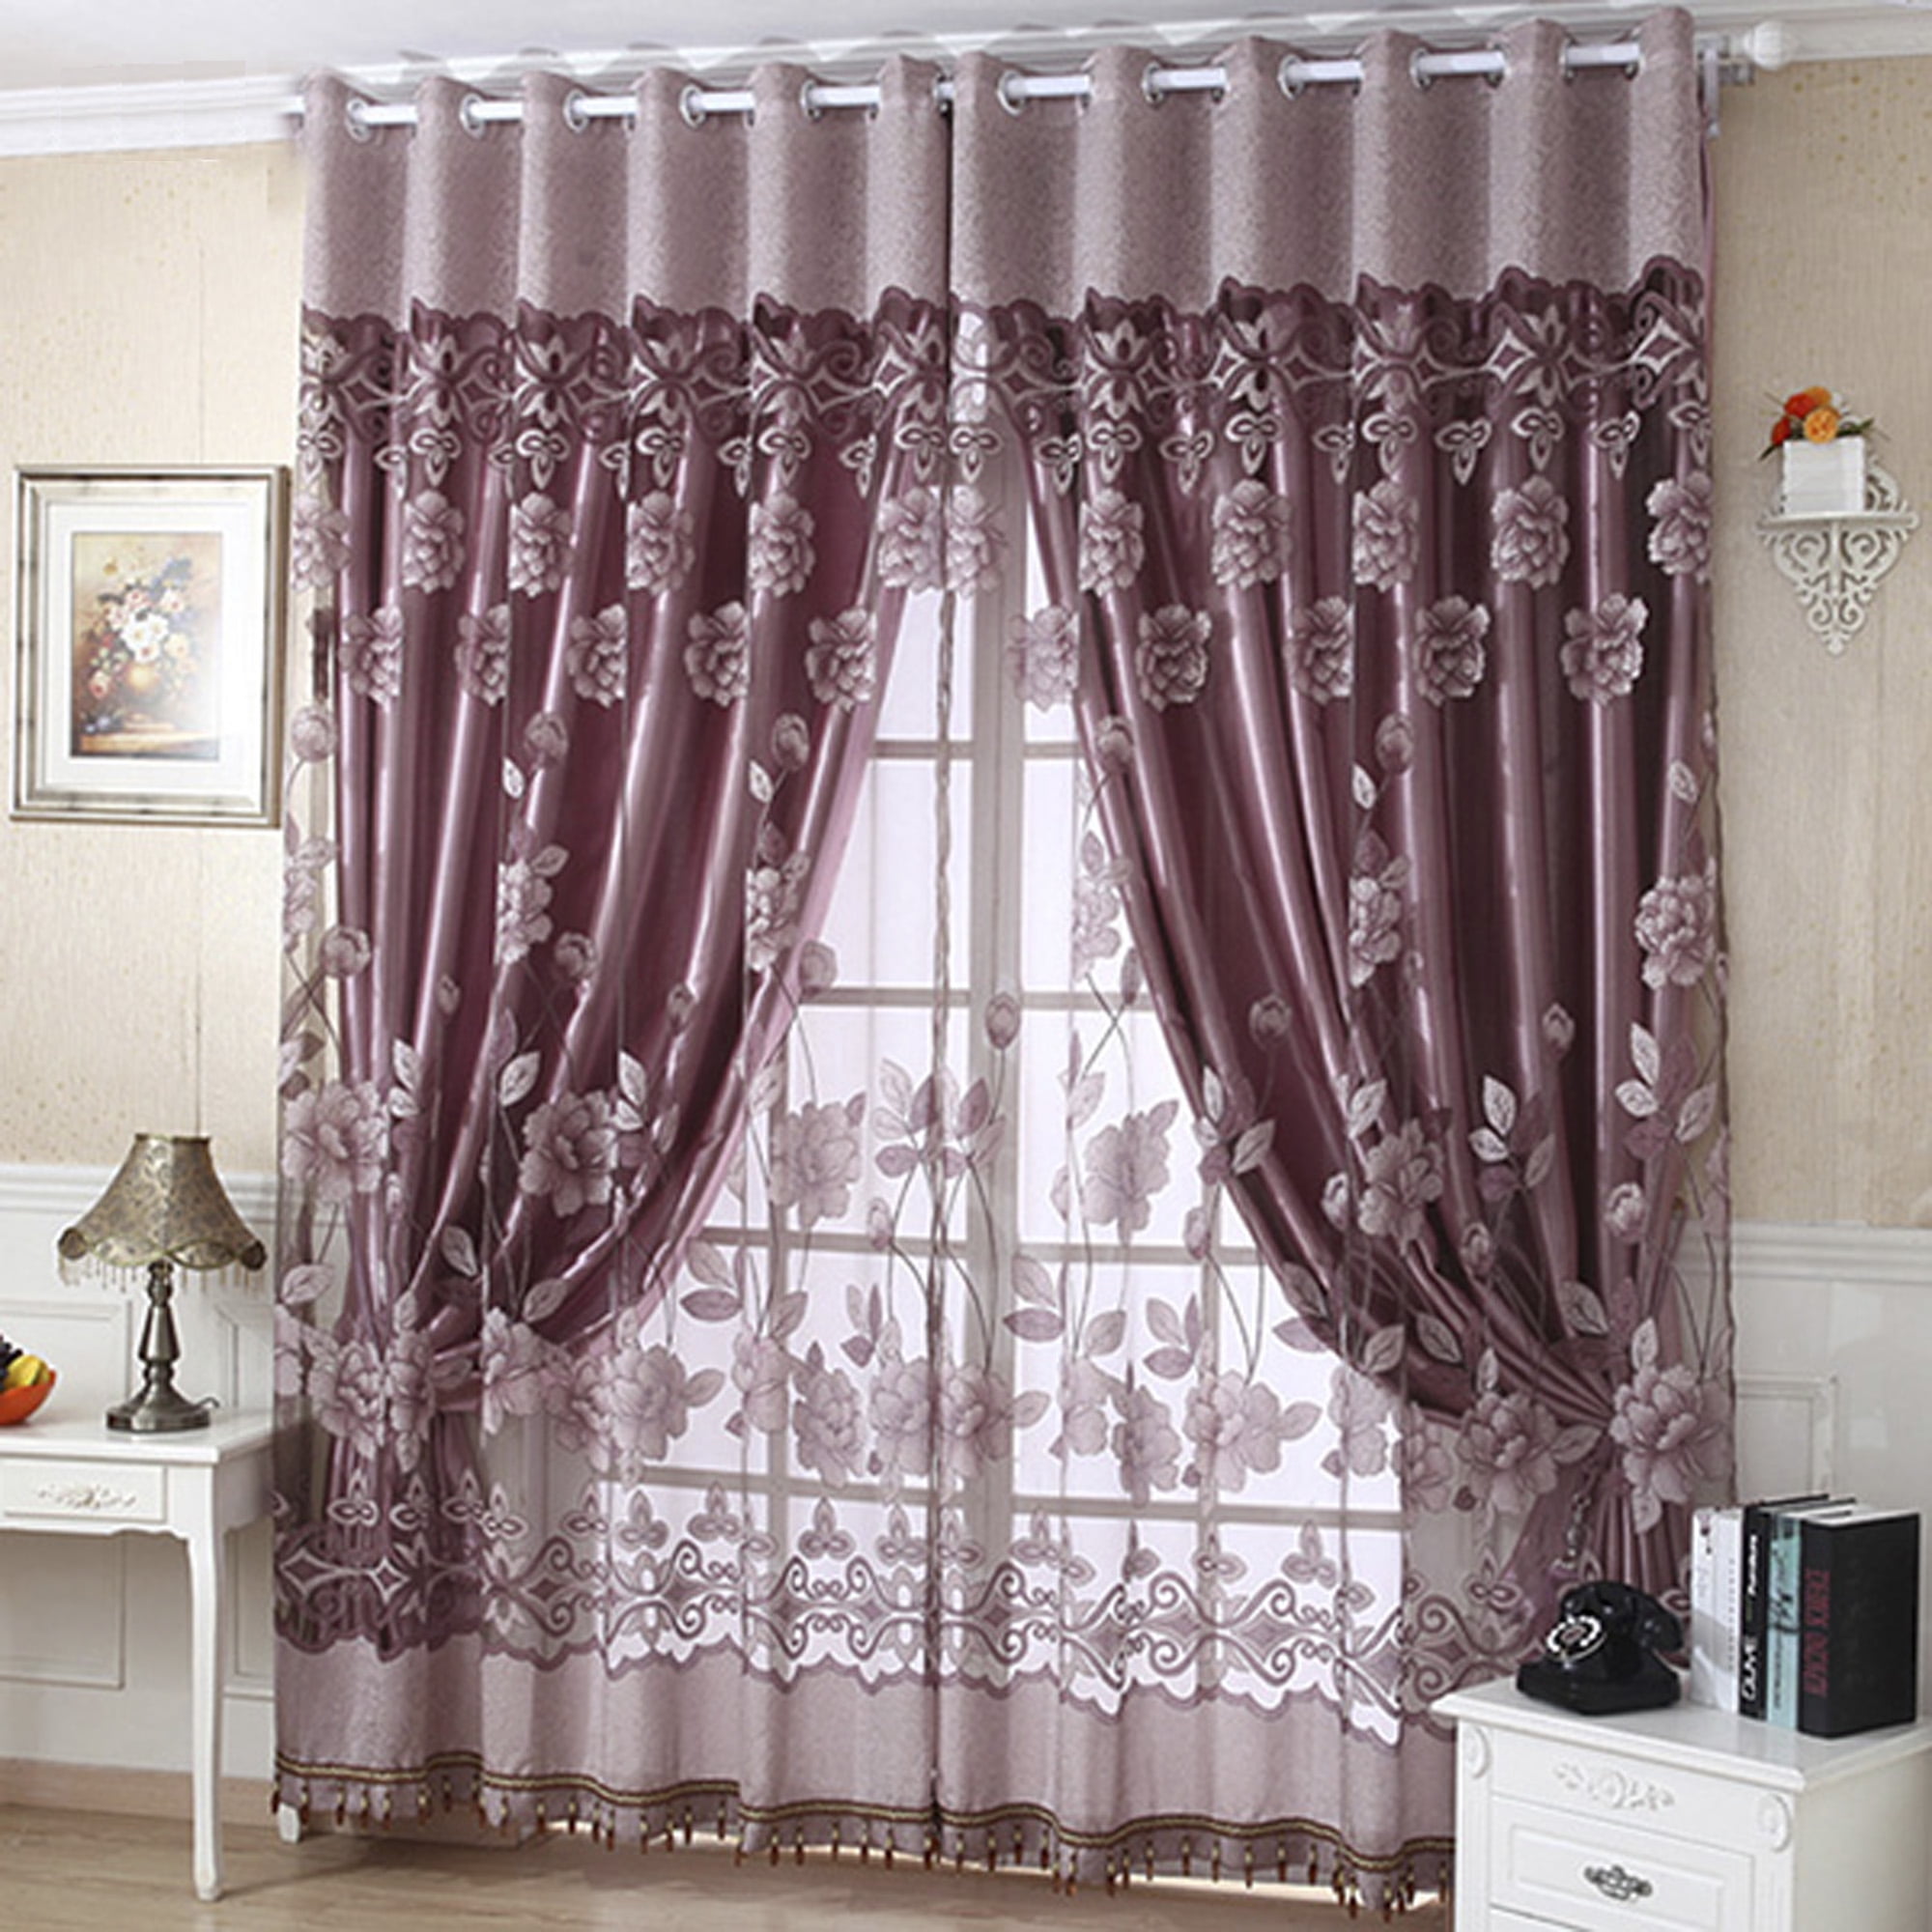 1X Valances Tulle Butterfly Calico Door Window Curtain Drape Panel Scarf Divider 